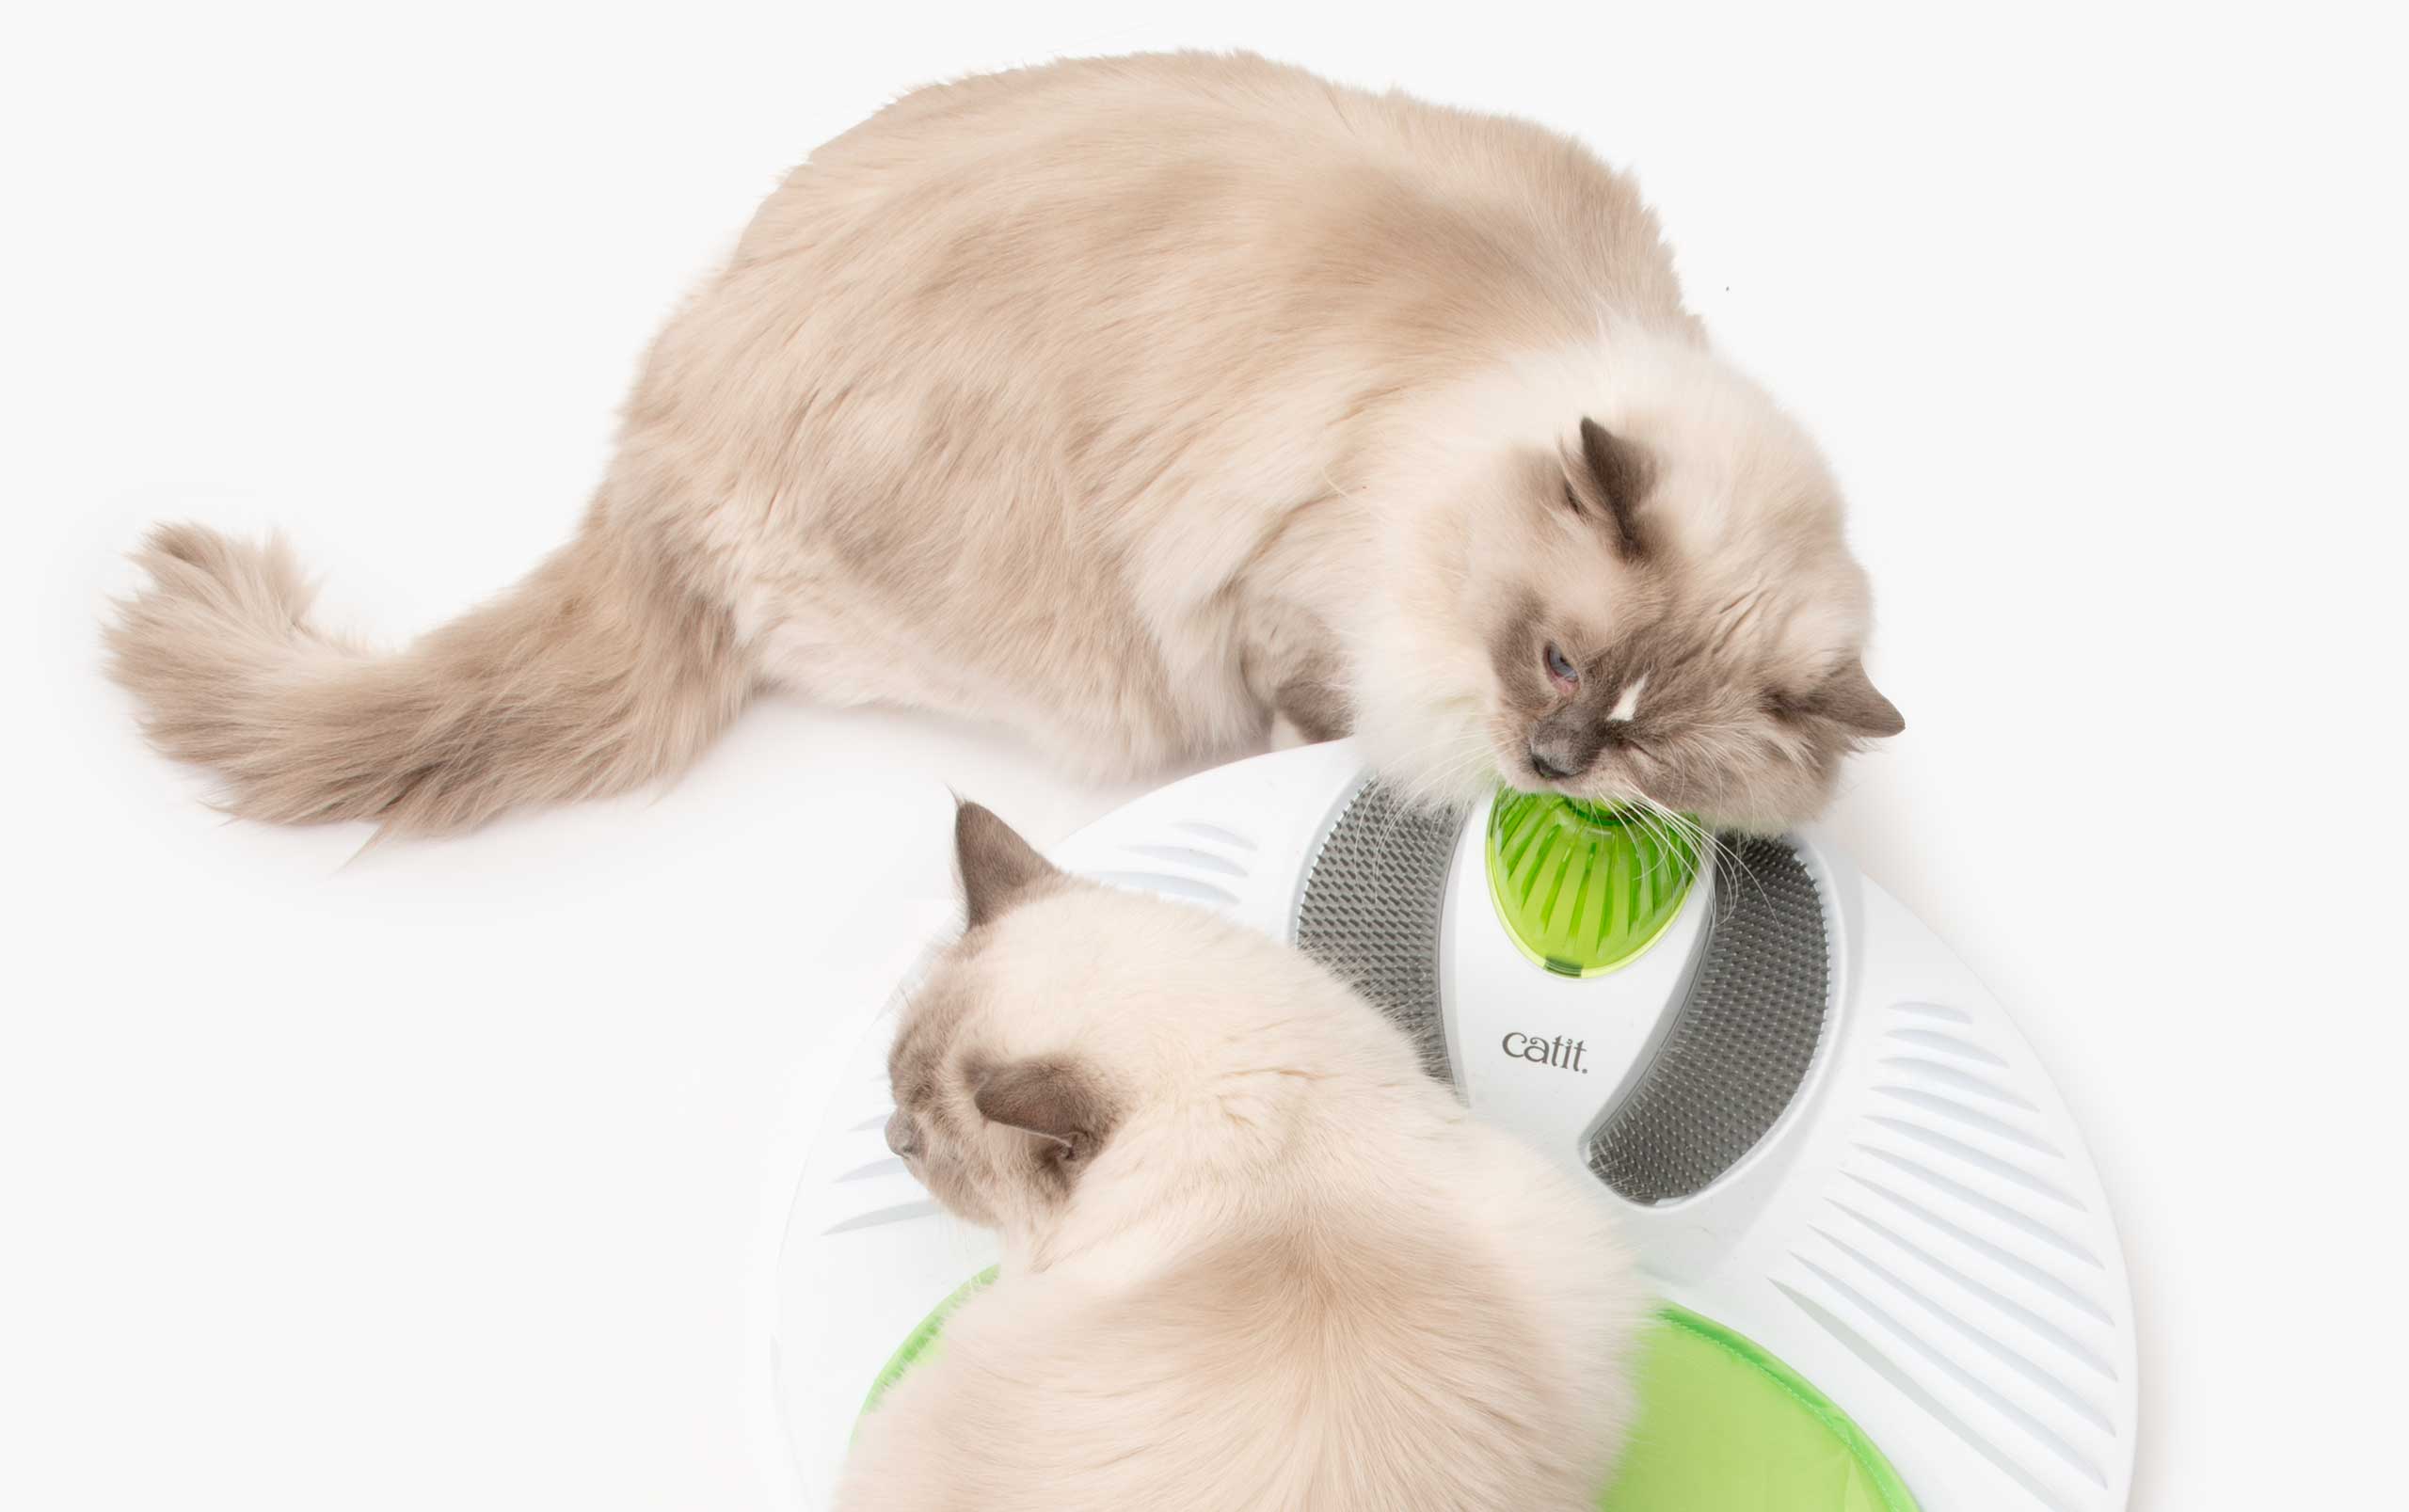 Apply catnip so cats will be more likely interact with toys and scratchers